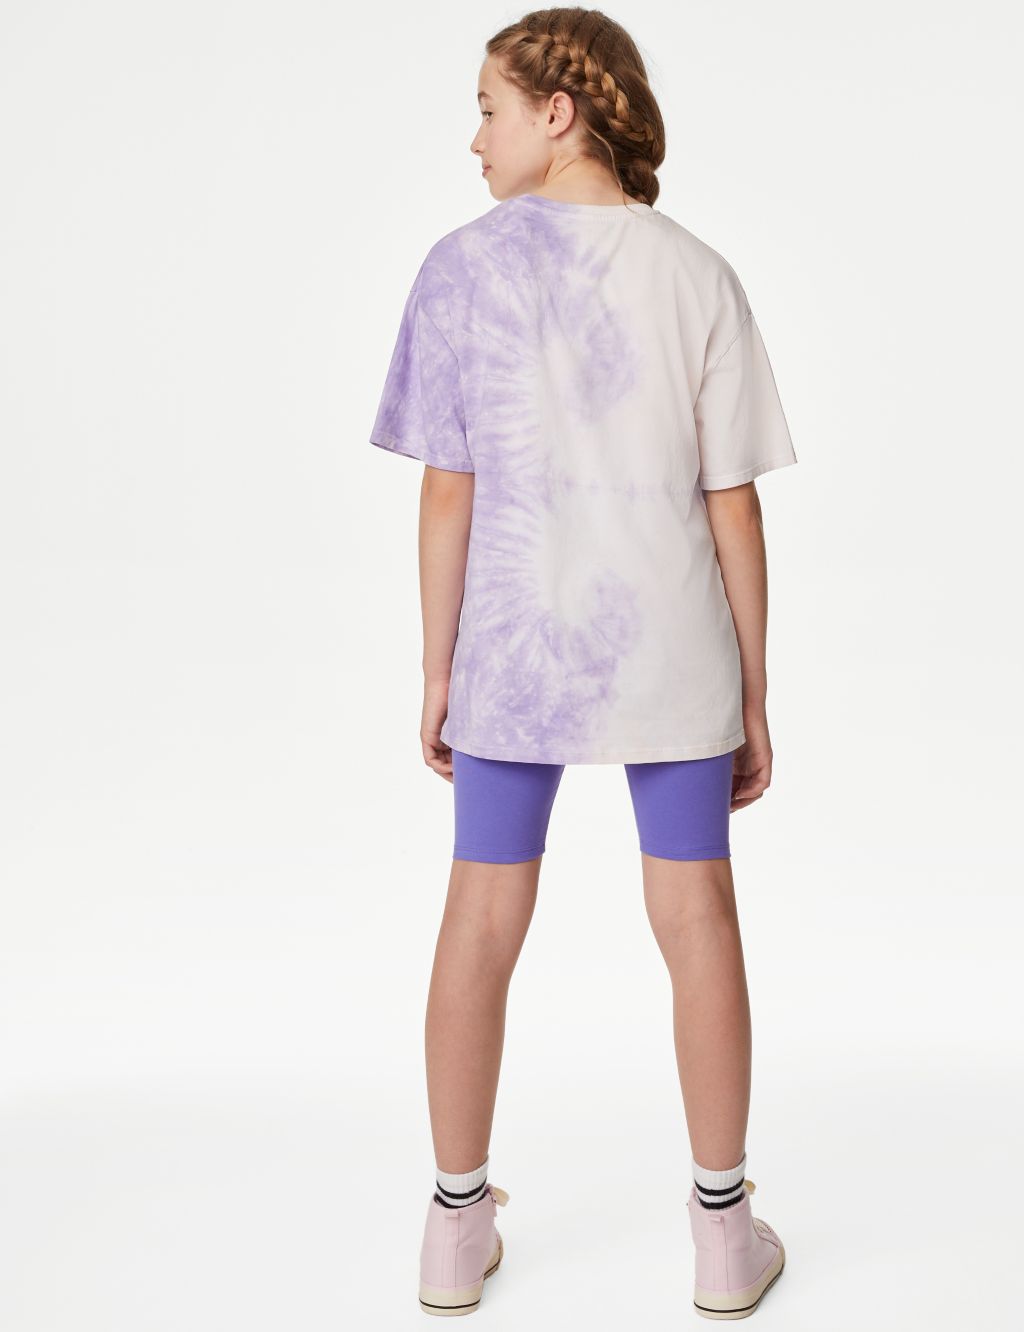 2pc Cotton Rich Tie Dye Top & Bottom Outfit (6-16 Yrs) image 3